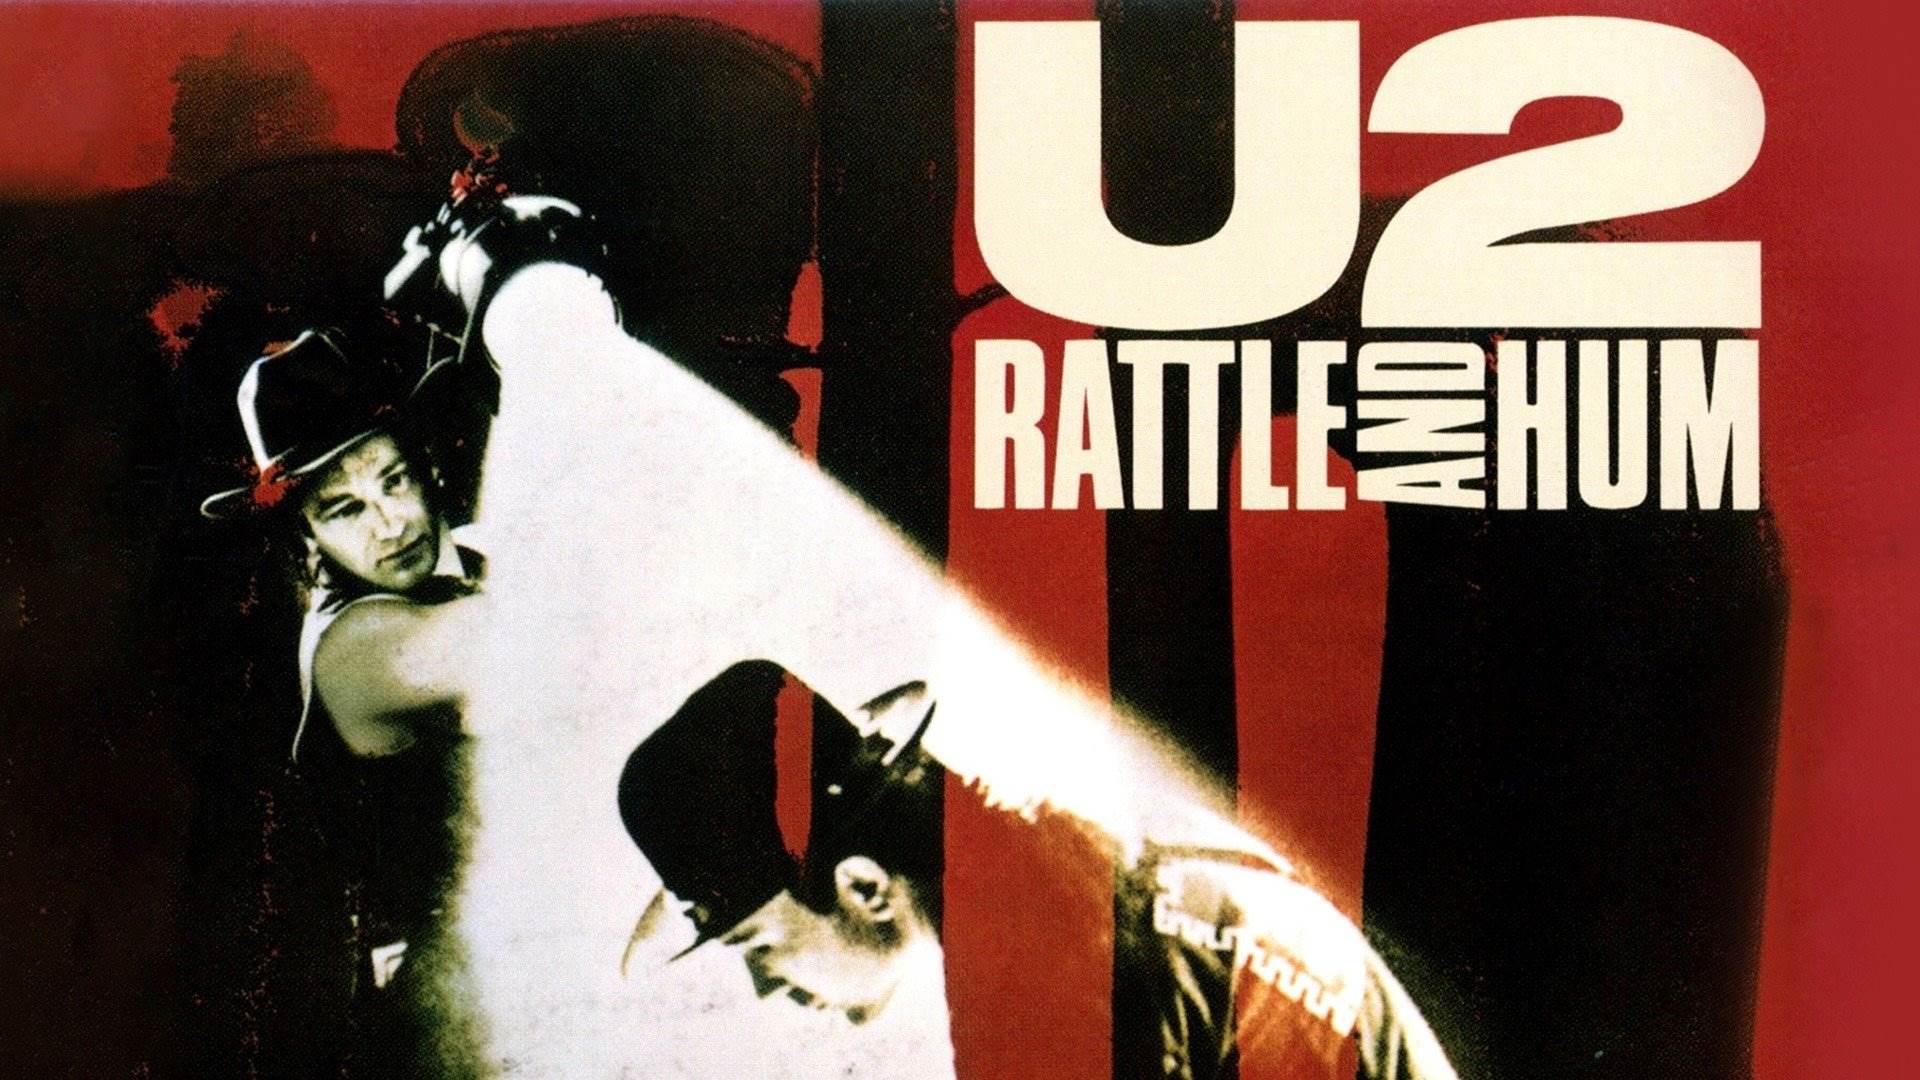 49-facts-about-the-movie-u2-rattle-and-hum